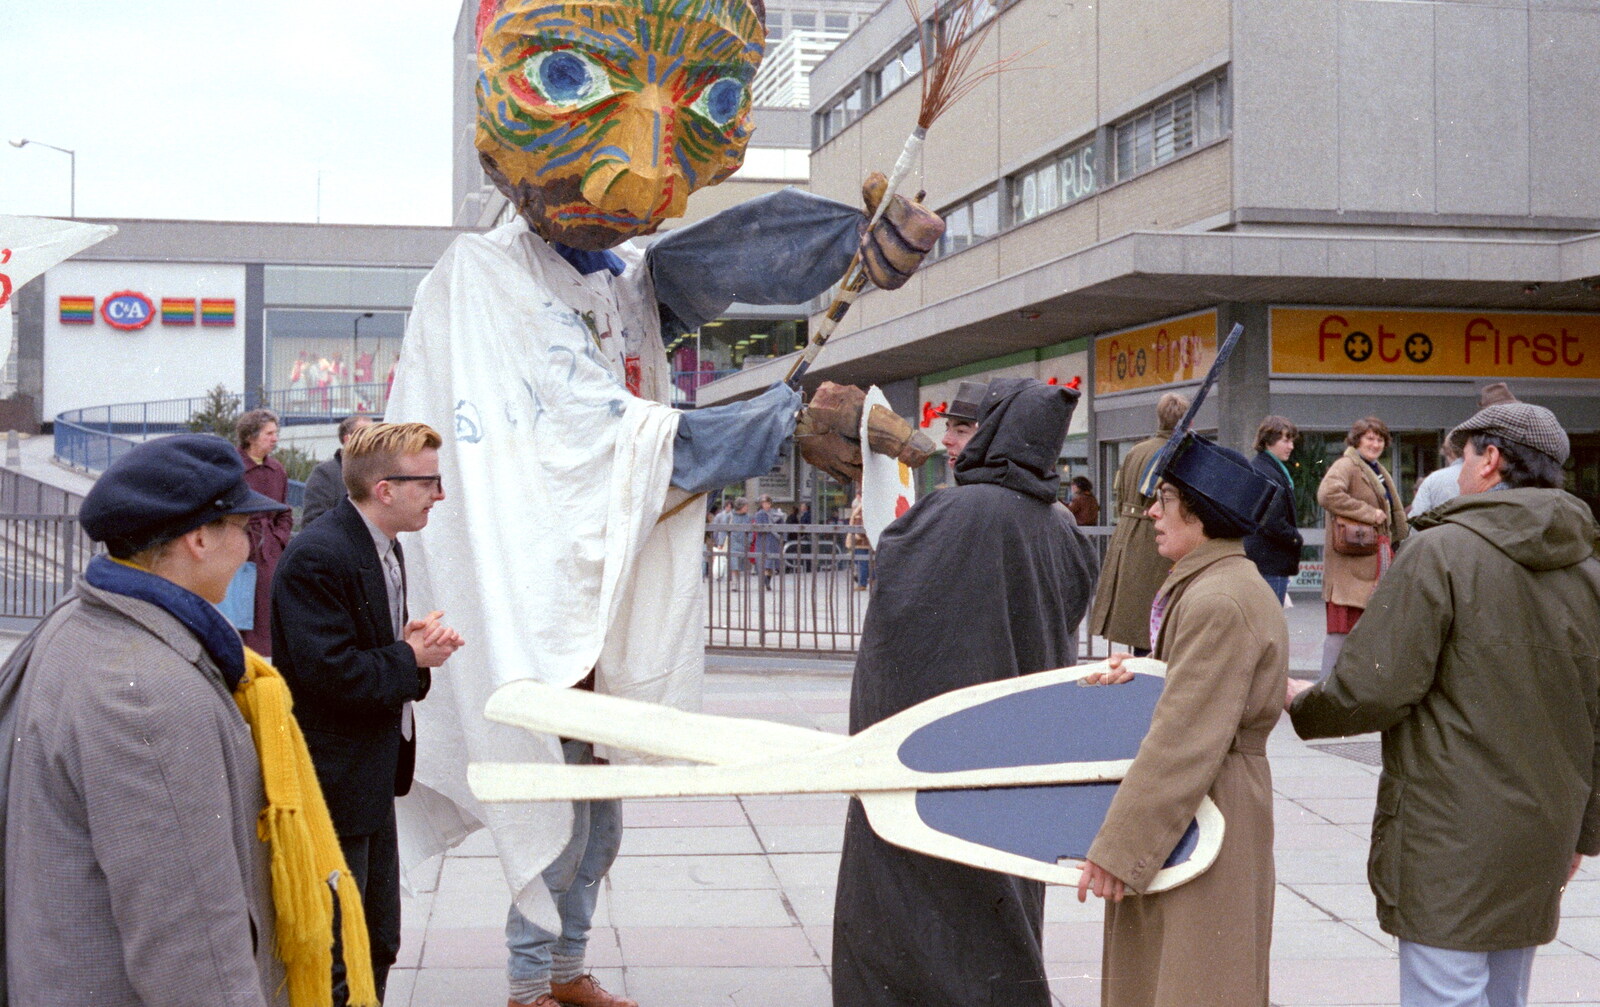 Roaming about with a giant pair of scissors from Uni: A Van Gogh Grant Cuts Protest, Plymouth, Devon - 1st March 1986